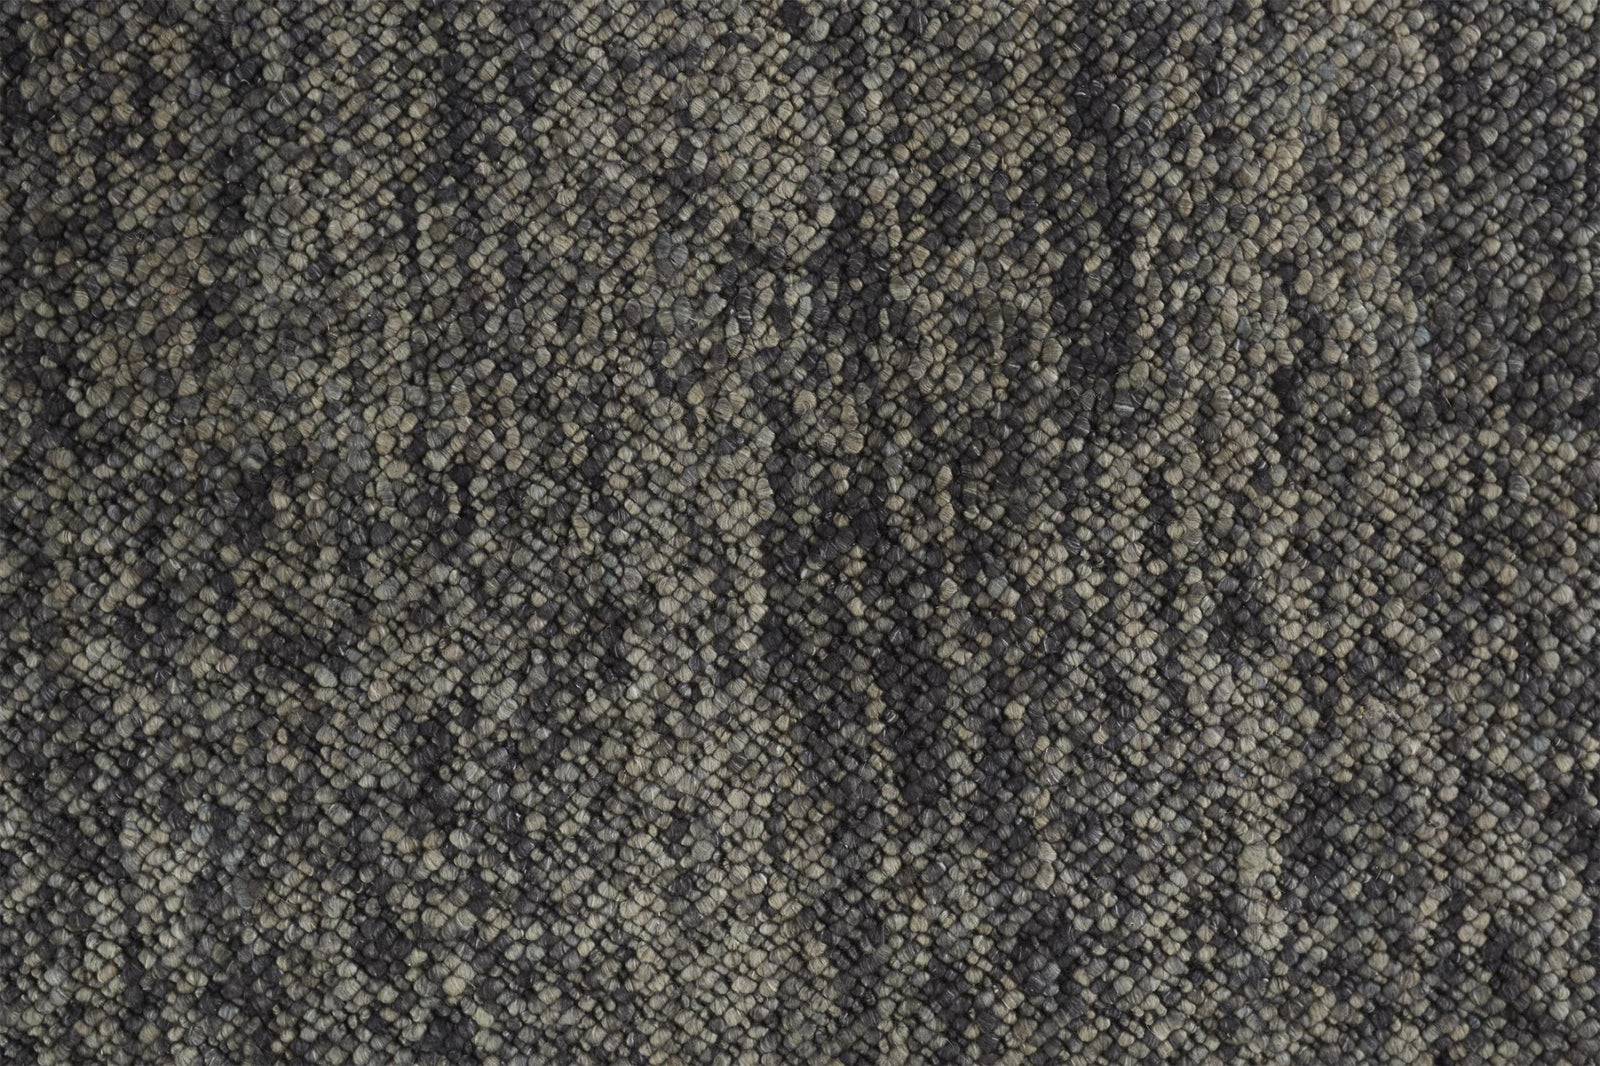 10' X 13' Gray Taupe And Black Wool Hand Woven Stain Resistant Area Rug